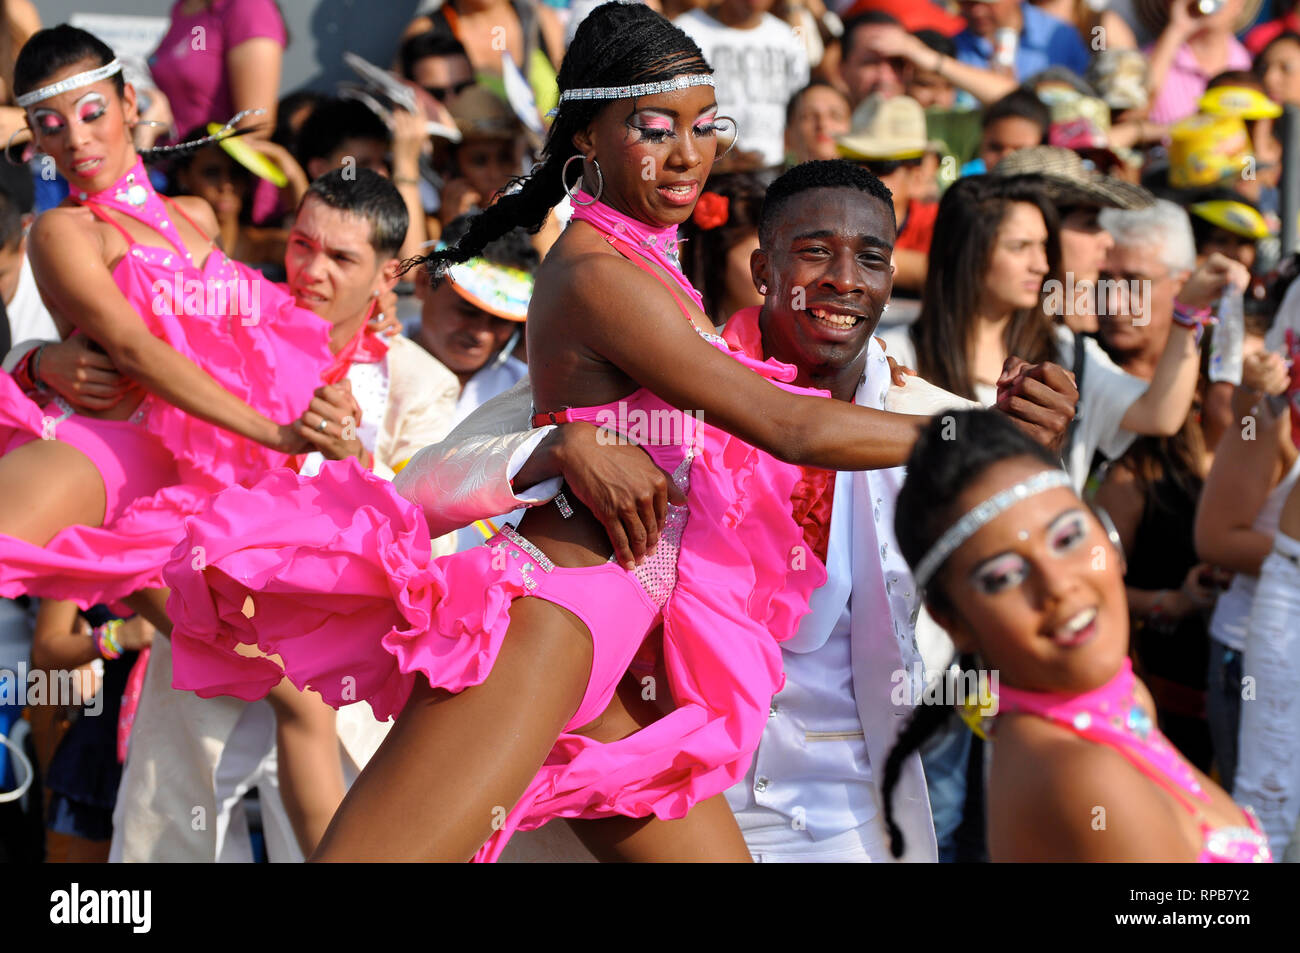 Salsa dancers perform at the Salsodromo in the Cali Fair 2010 Stock Photo